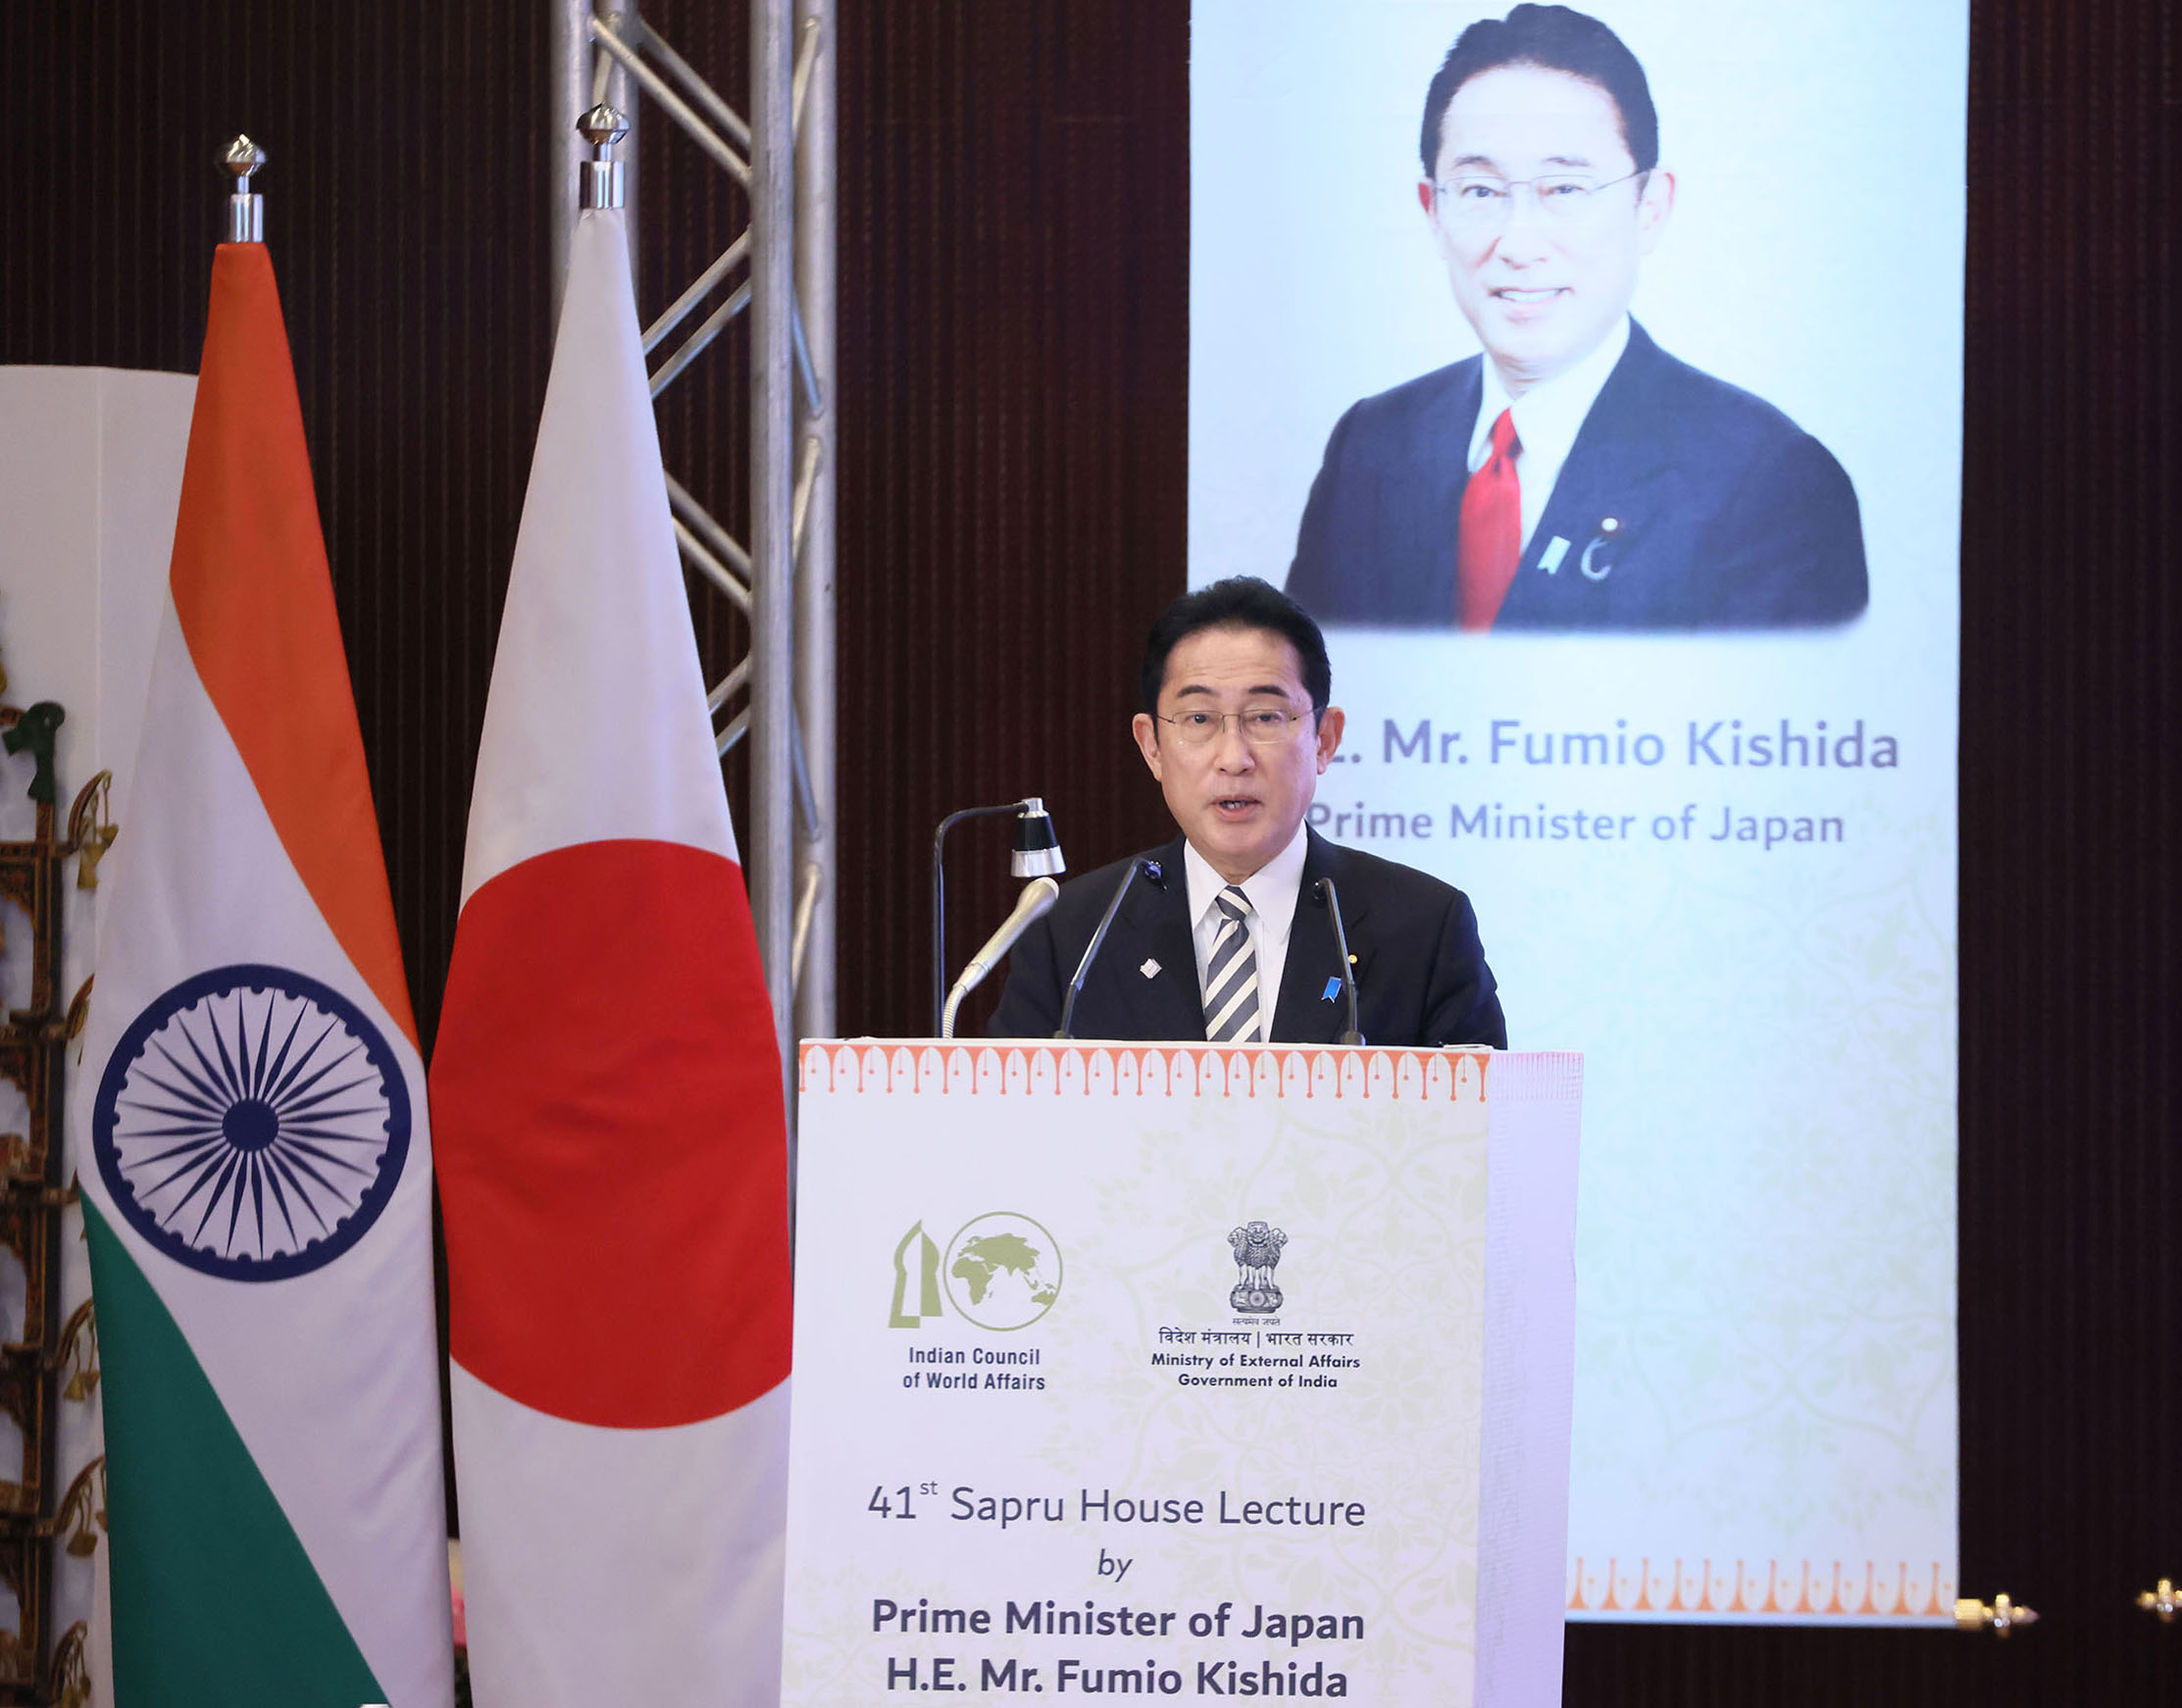 Prime Minister Kishida delivering a policy speech at the Indian Council of World Affairs (ICWA) (4)